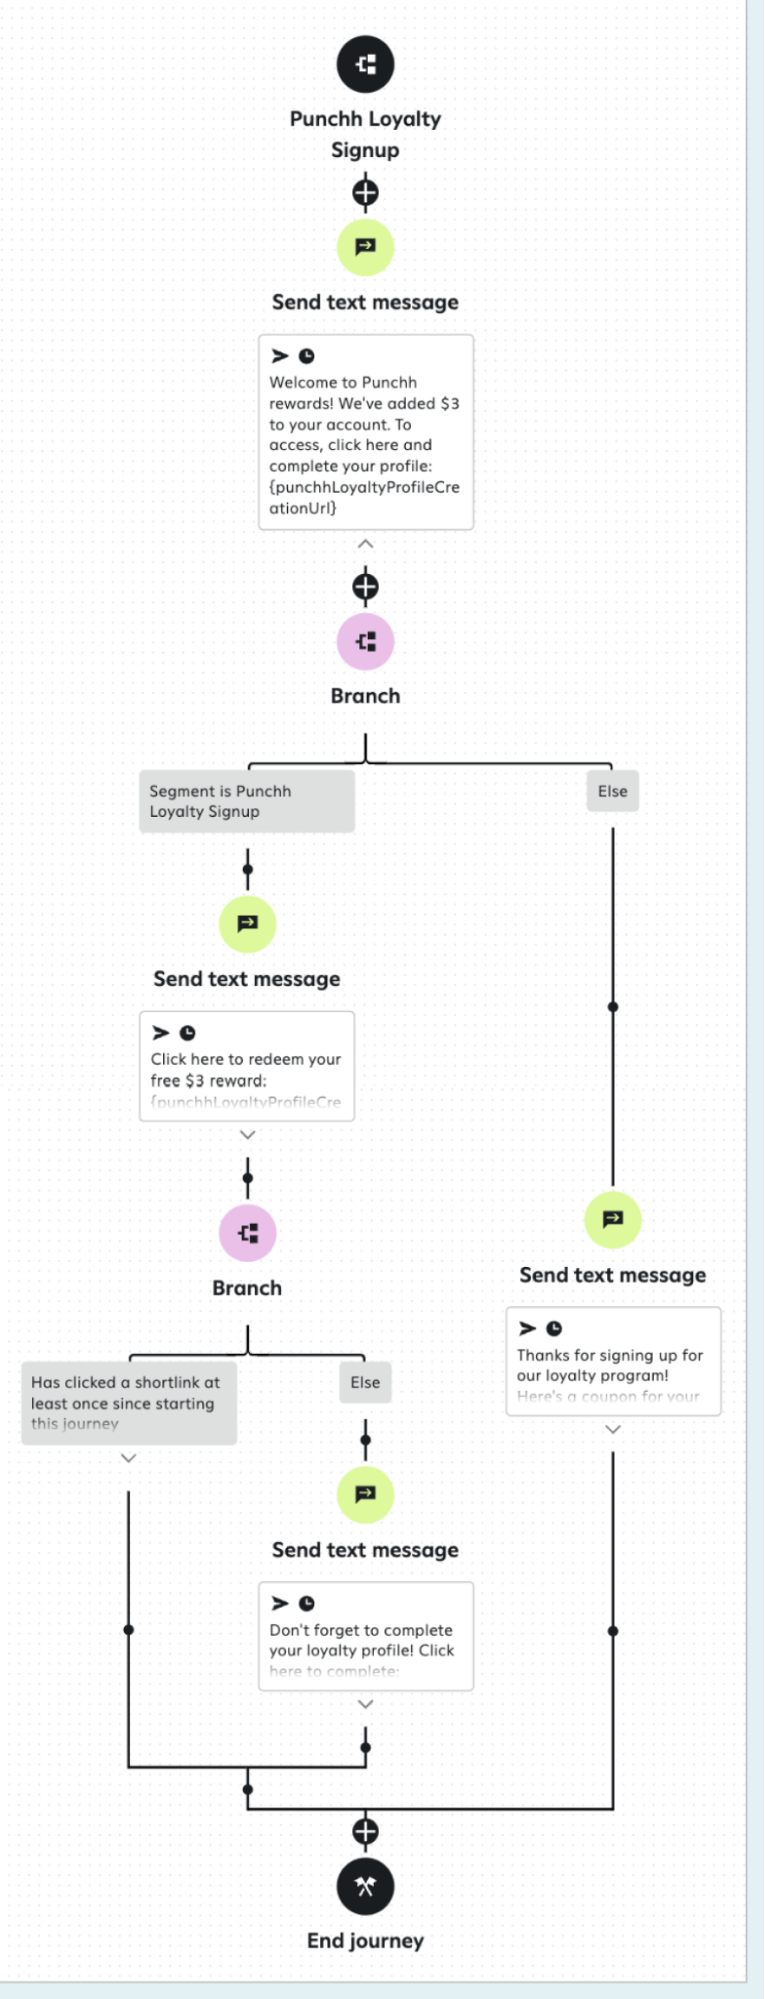 The full view of a Punchh Loyalty Signup journey in Attentive.